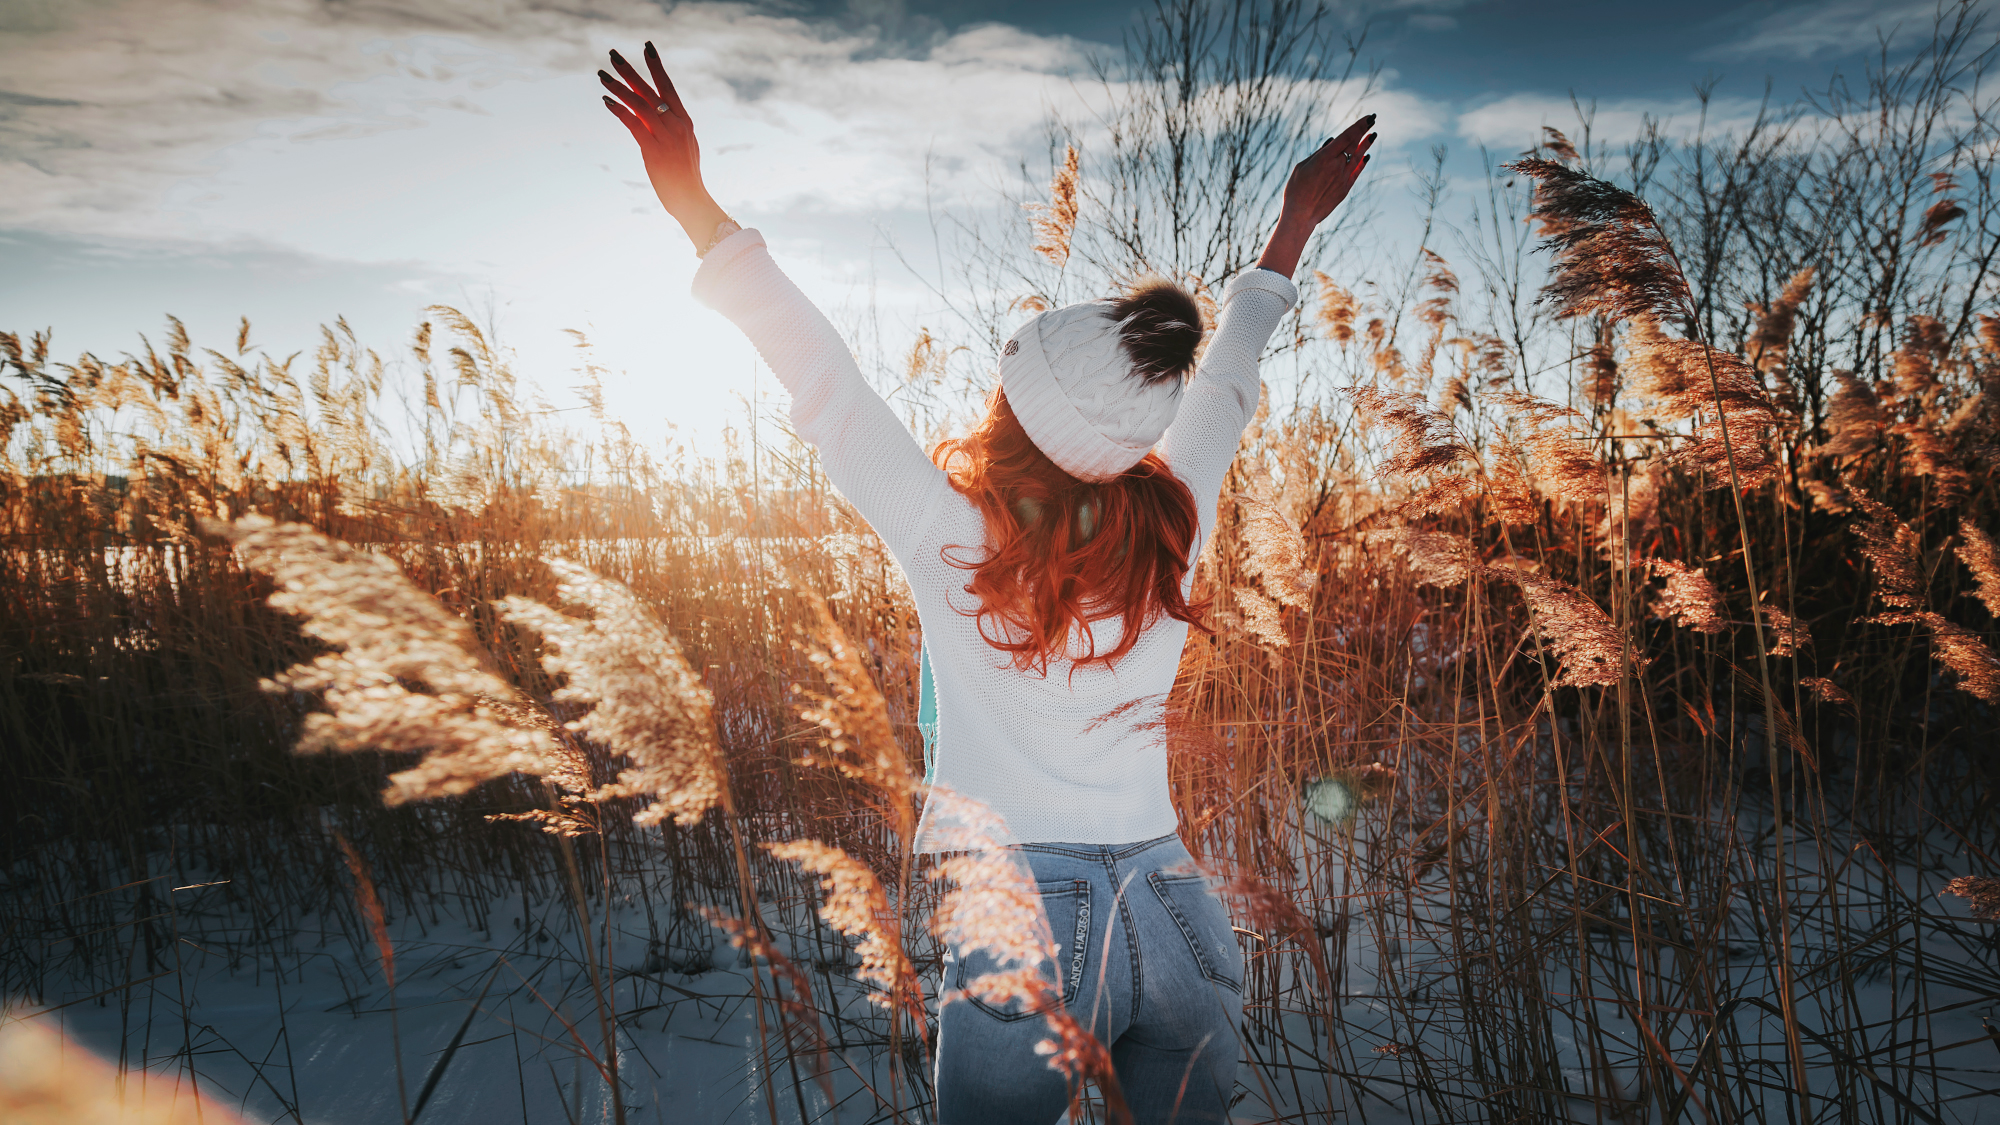 Women Model Redhead Portrait Back Woolly Hat Sweater Jeans Arms Up Outdoors Winter Snow Sky Sunset C 2000x1125